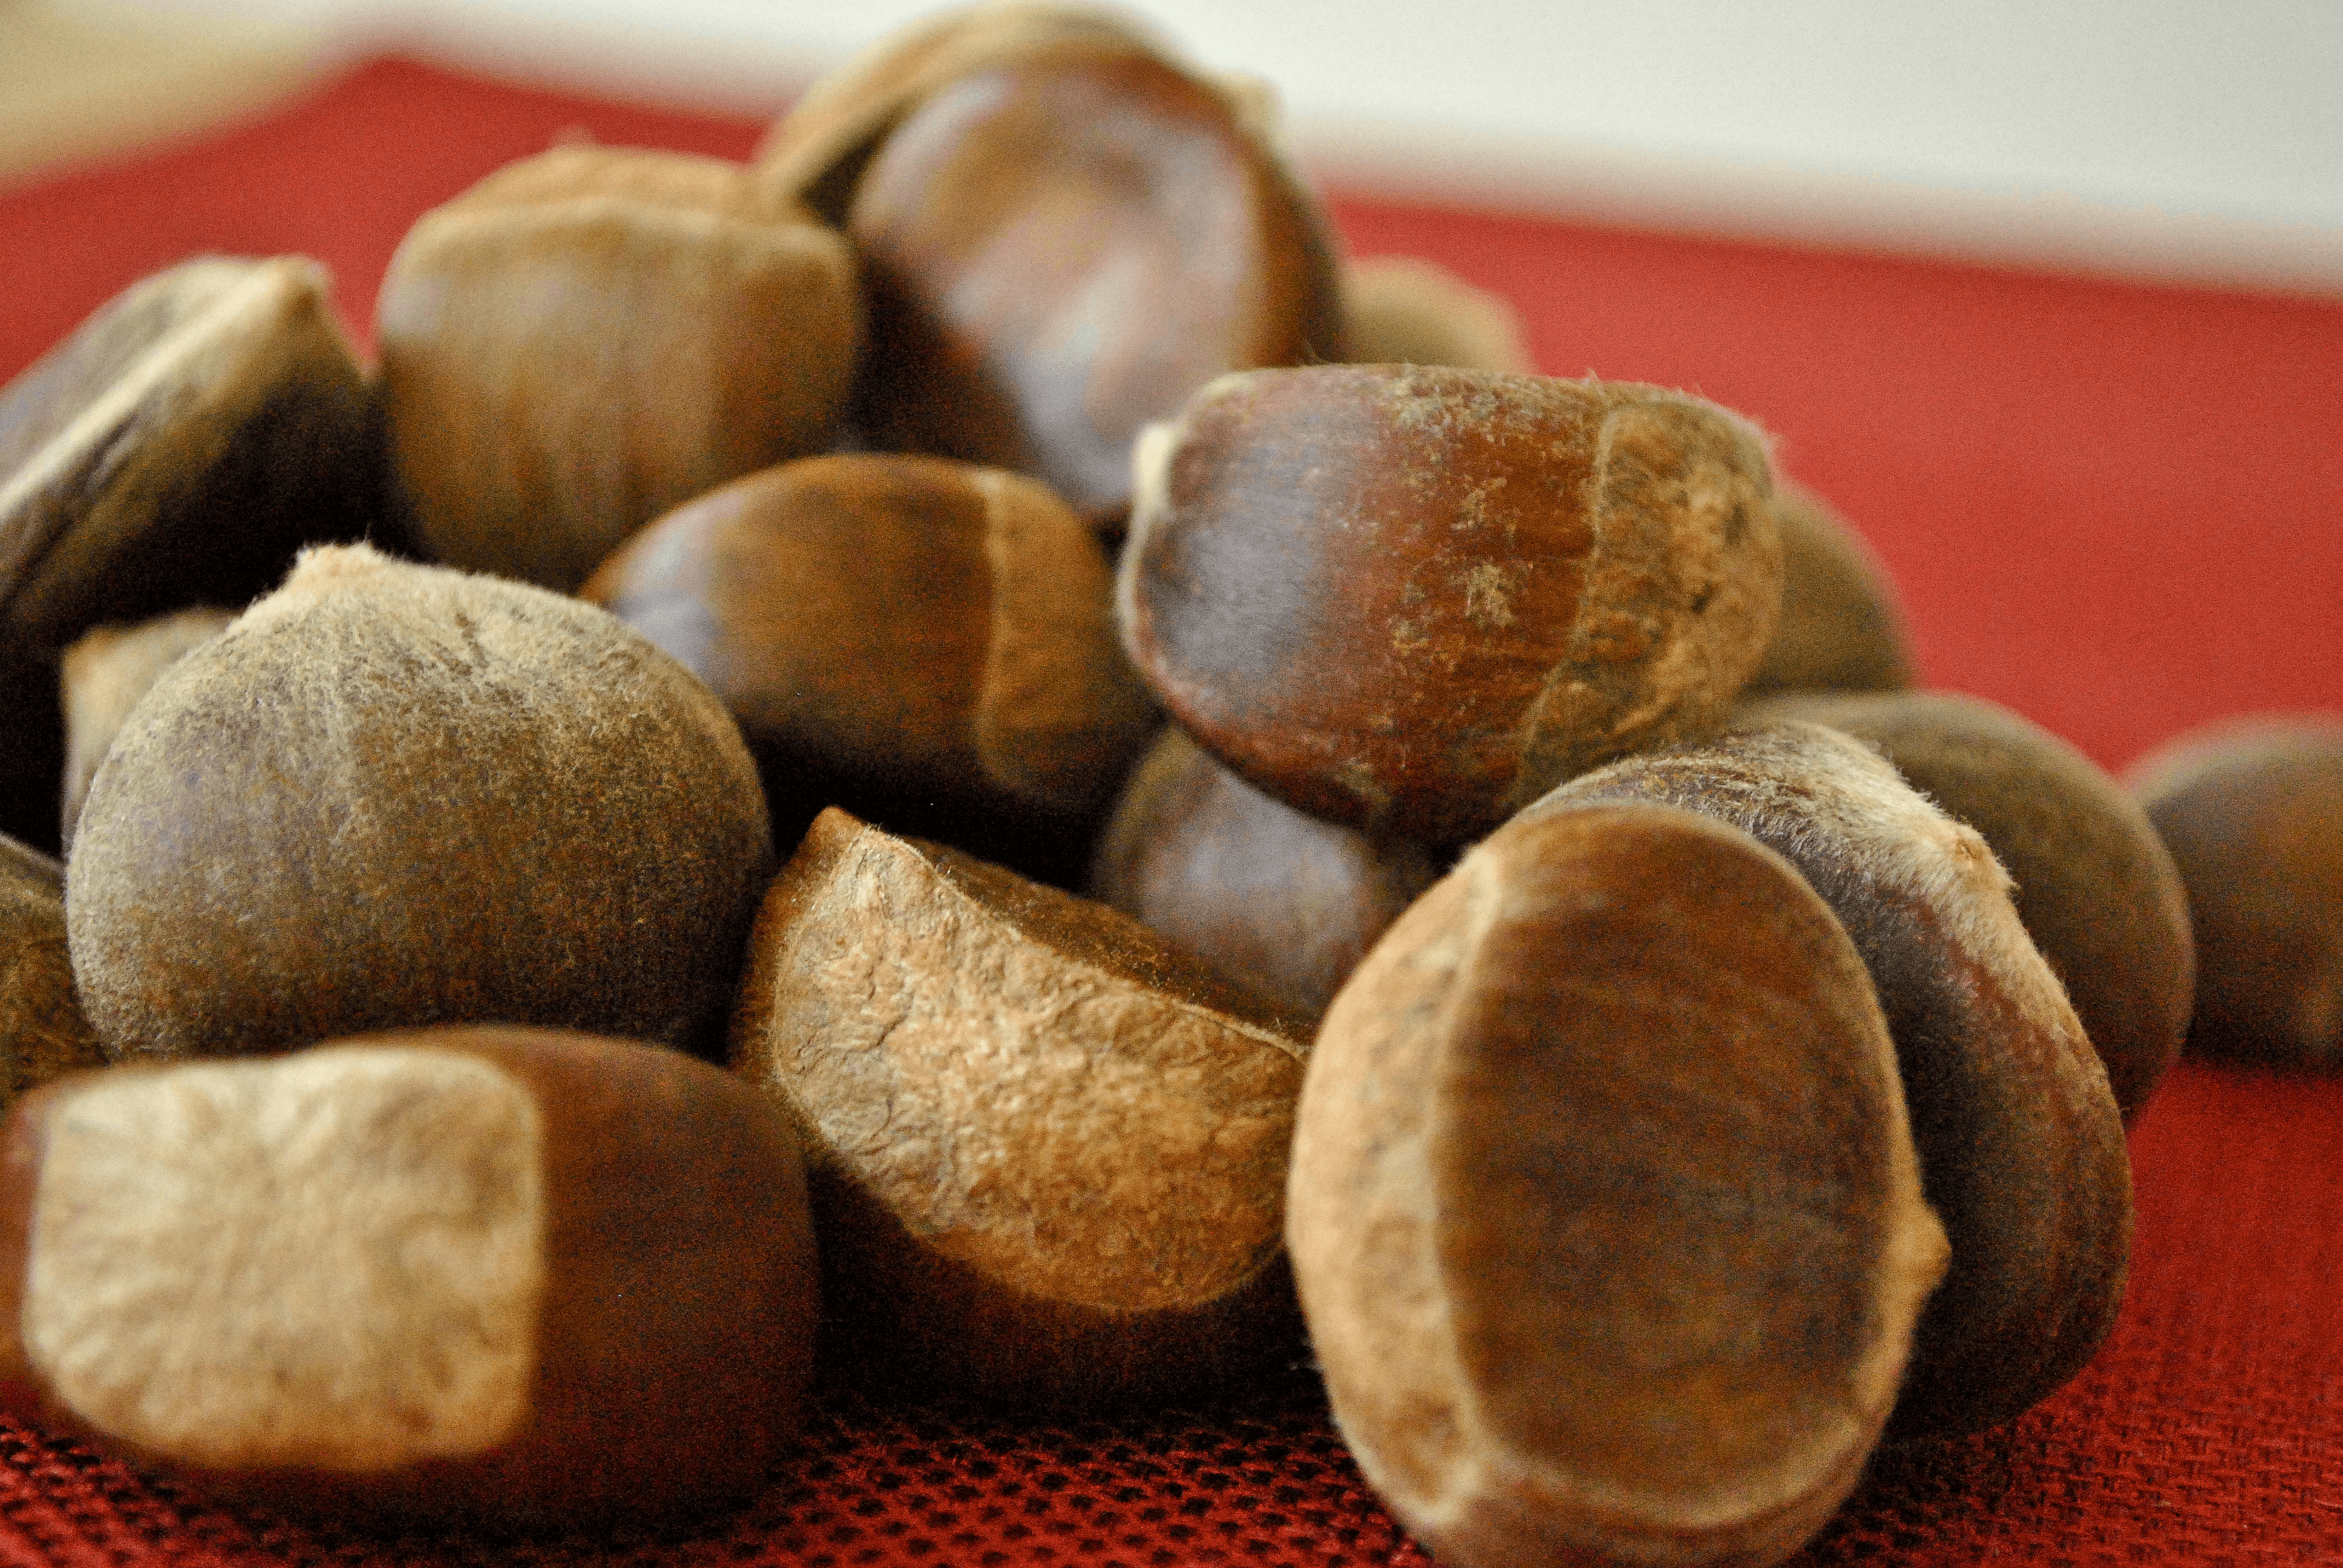 Chestnuts Block the Effects of Staph Bacteria